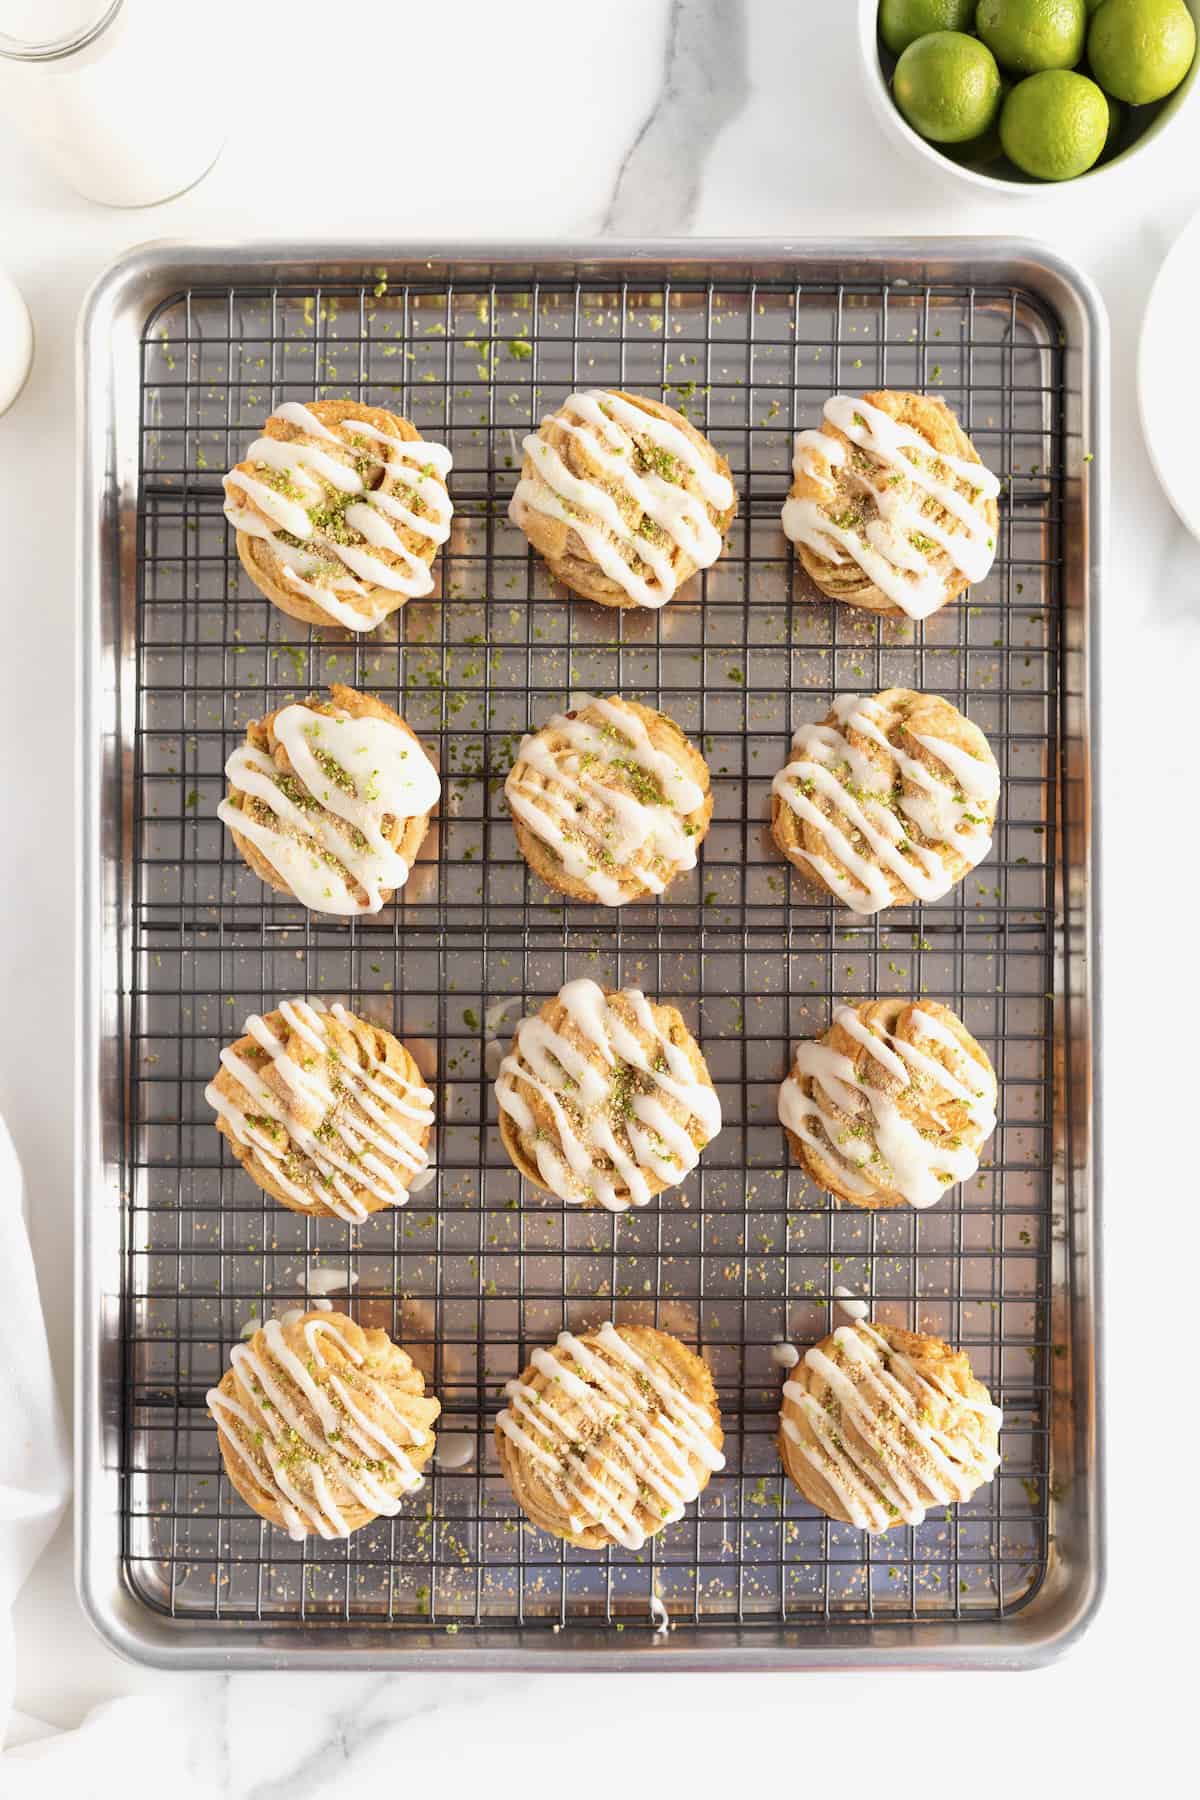 An aluminum baking pan with a wire cooling rack on top holding 12 key lime cruffins.